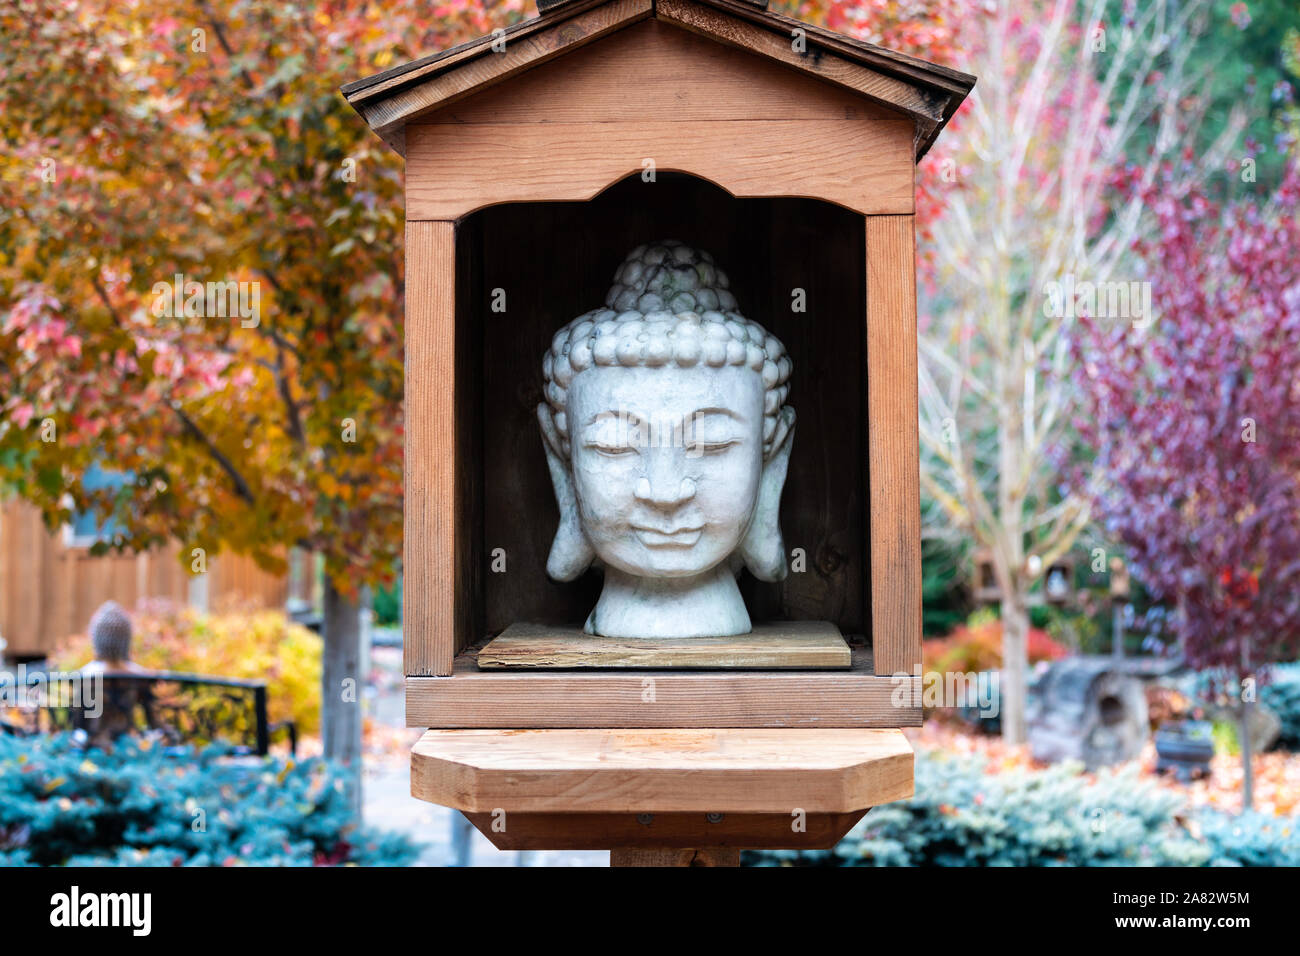 Buddha stone head in wooden display in an autumn garden with maple trees Stock Photo